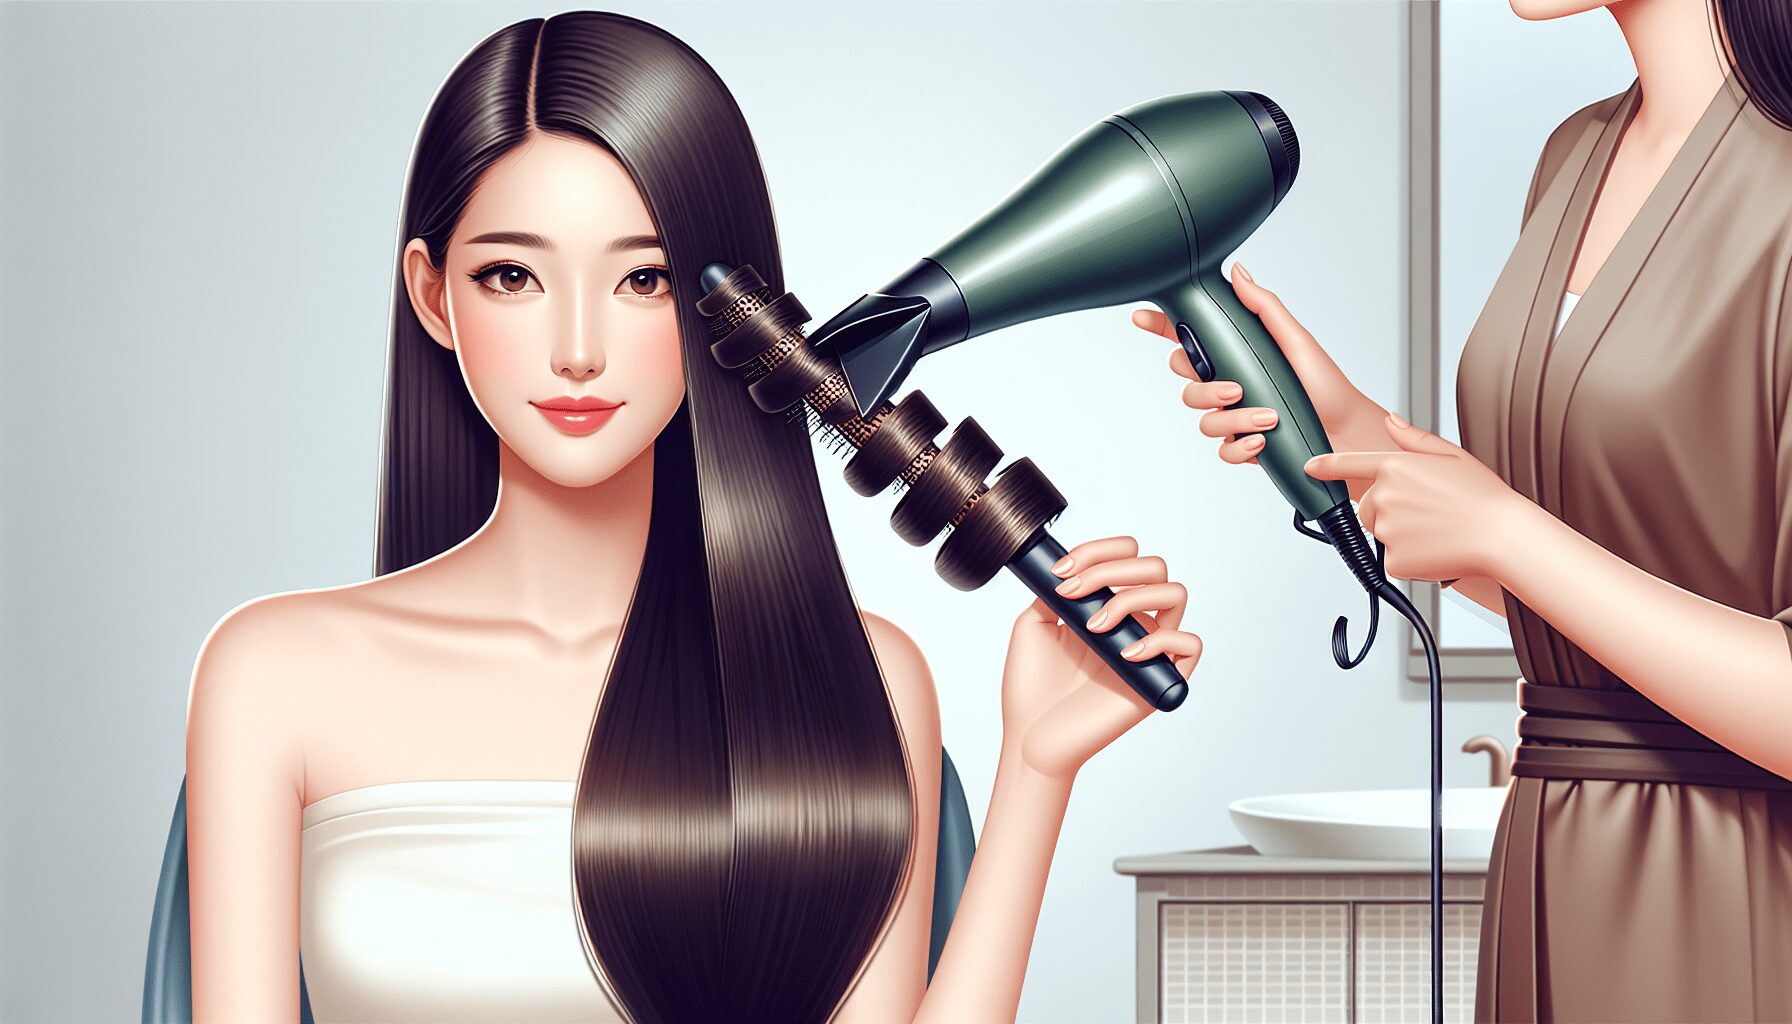 How Do I Prepare My Hair For Curling Dyson Airwrap?